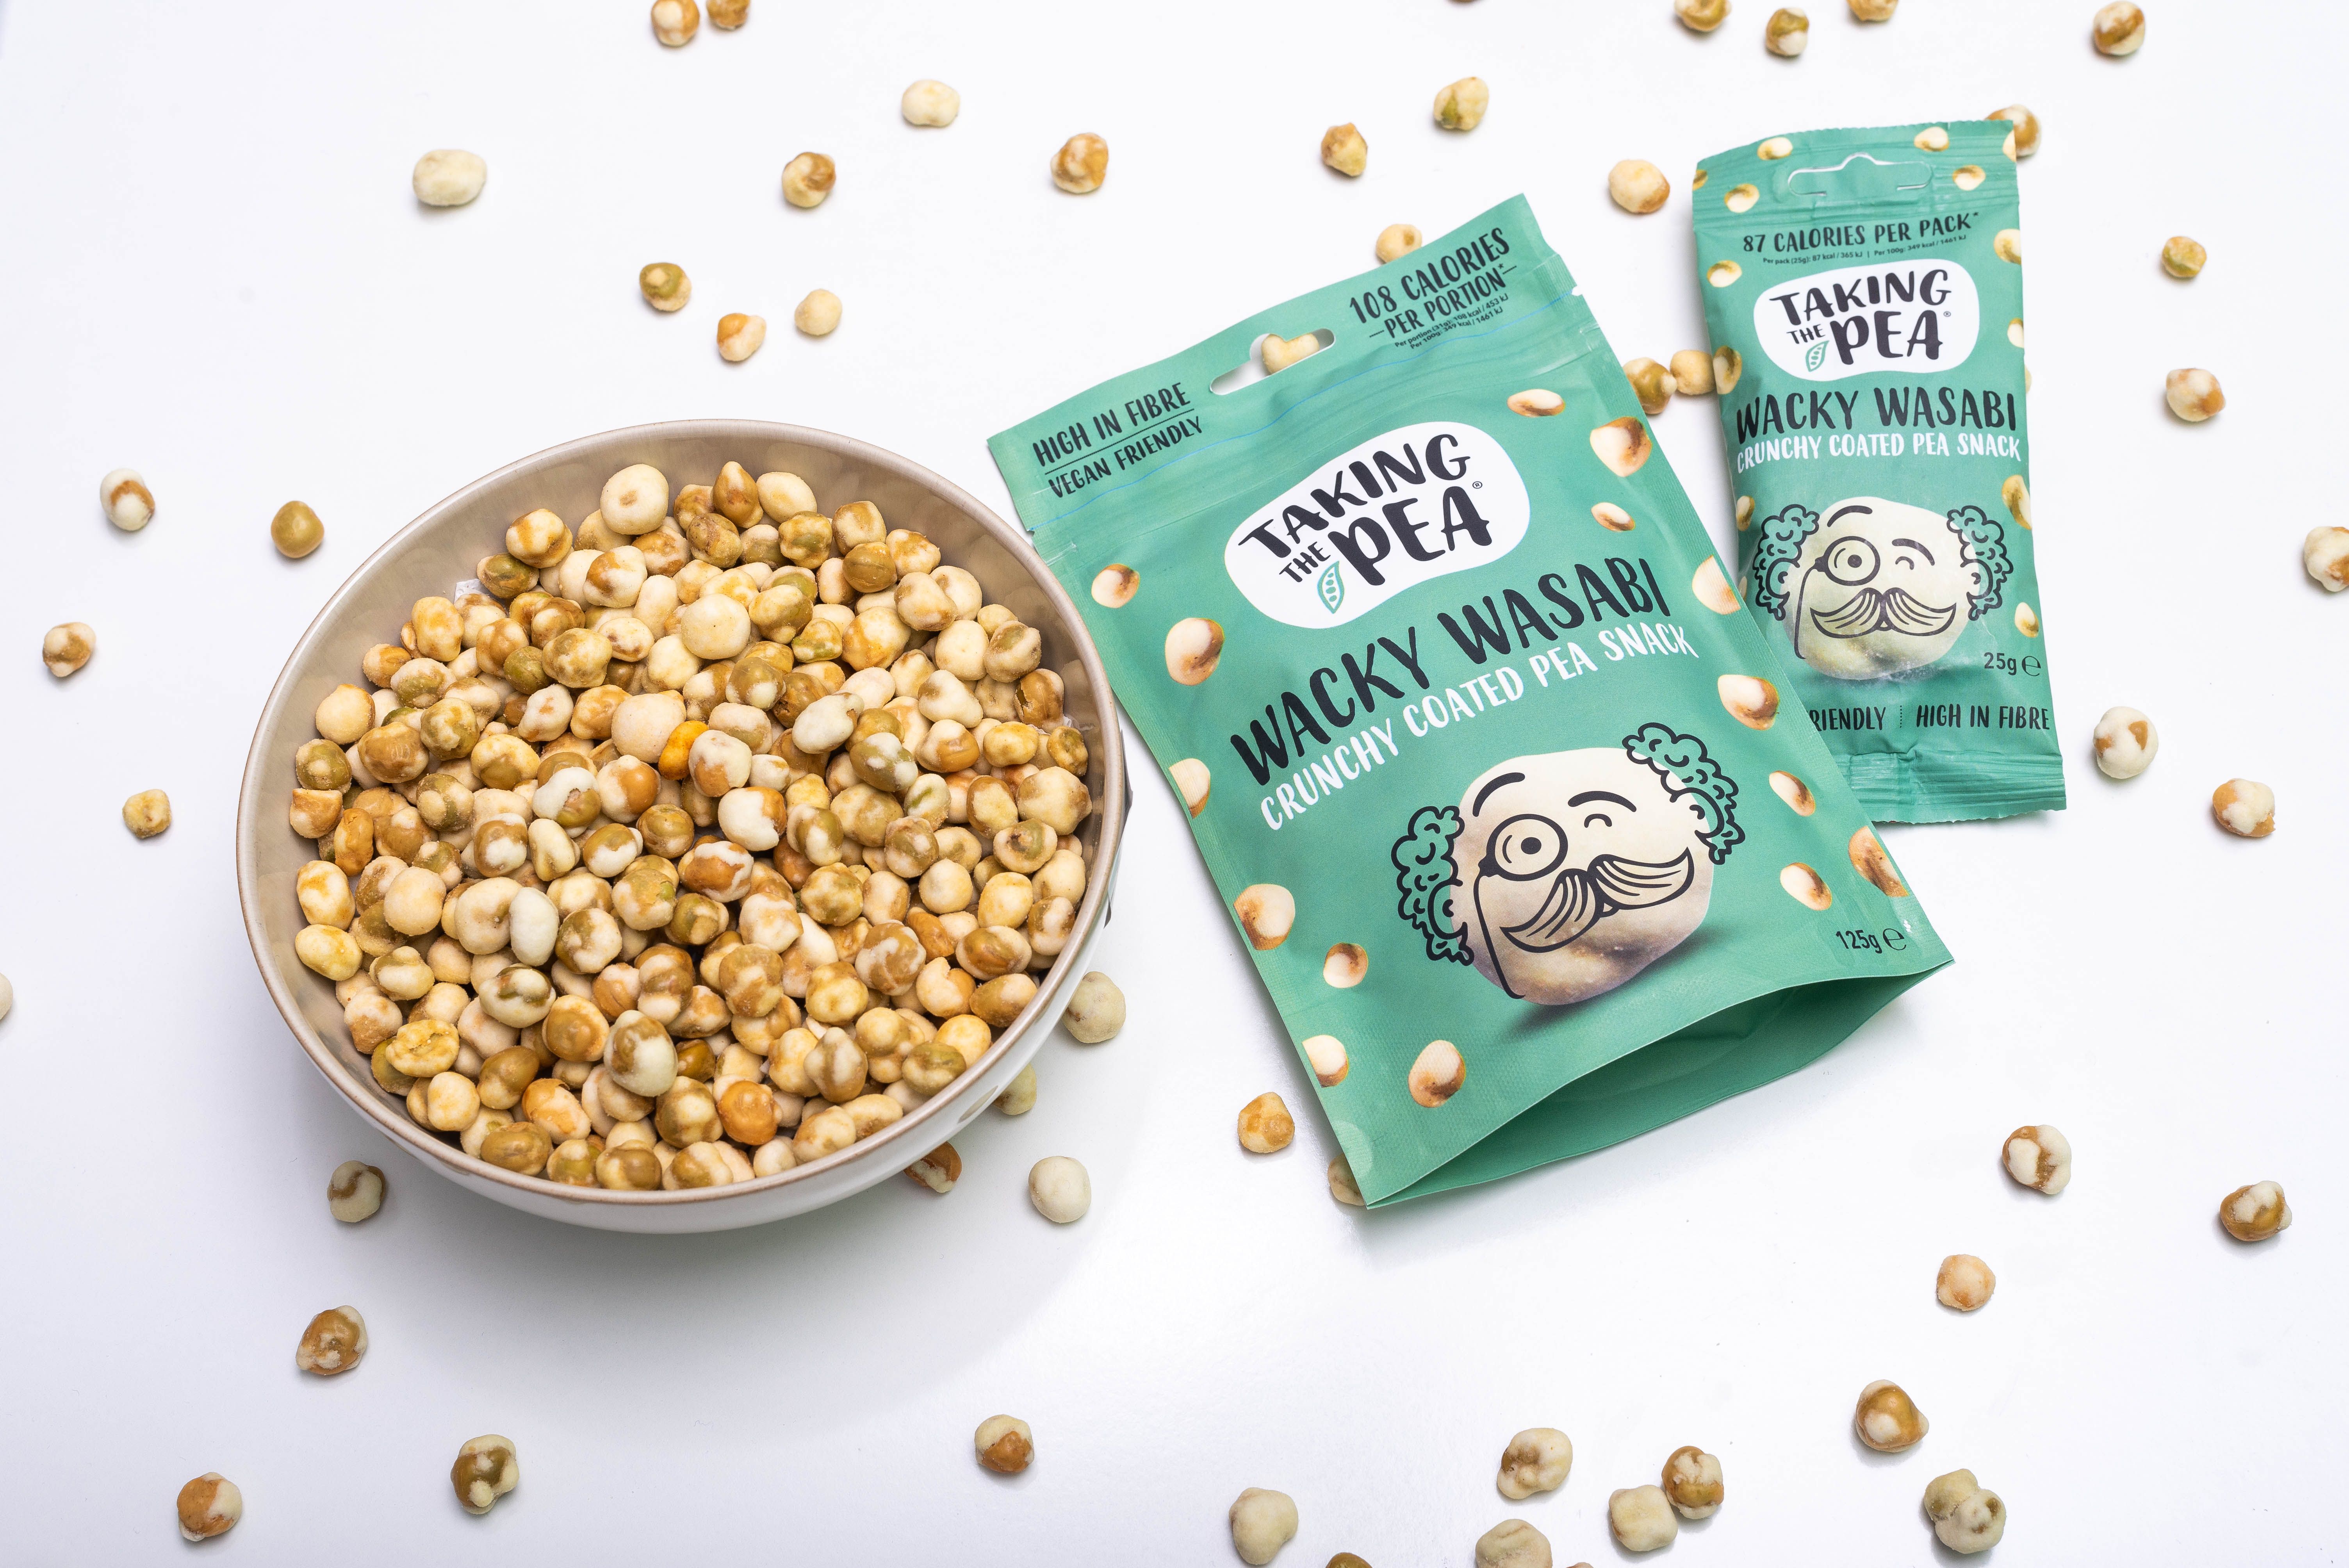 Snack brand Taking the Pea to debut new look at Speciality & Fine Food Fair